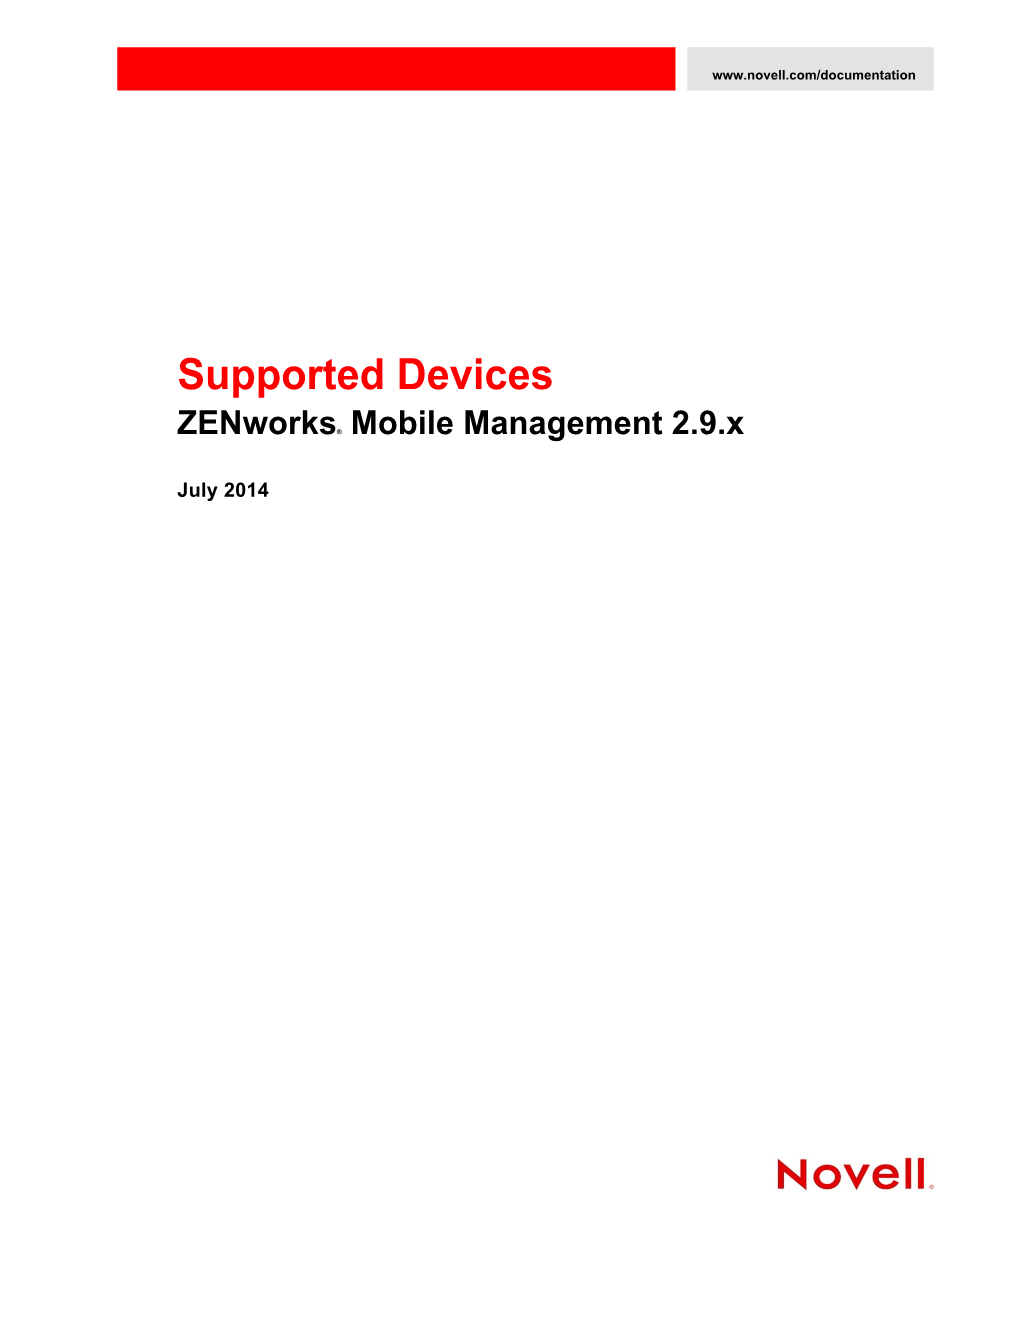 Zenworks Mobile Management 2.9.X Supported Devices